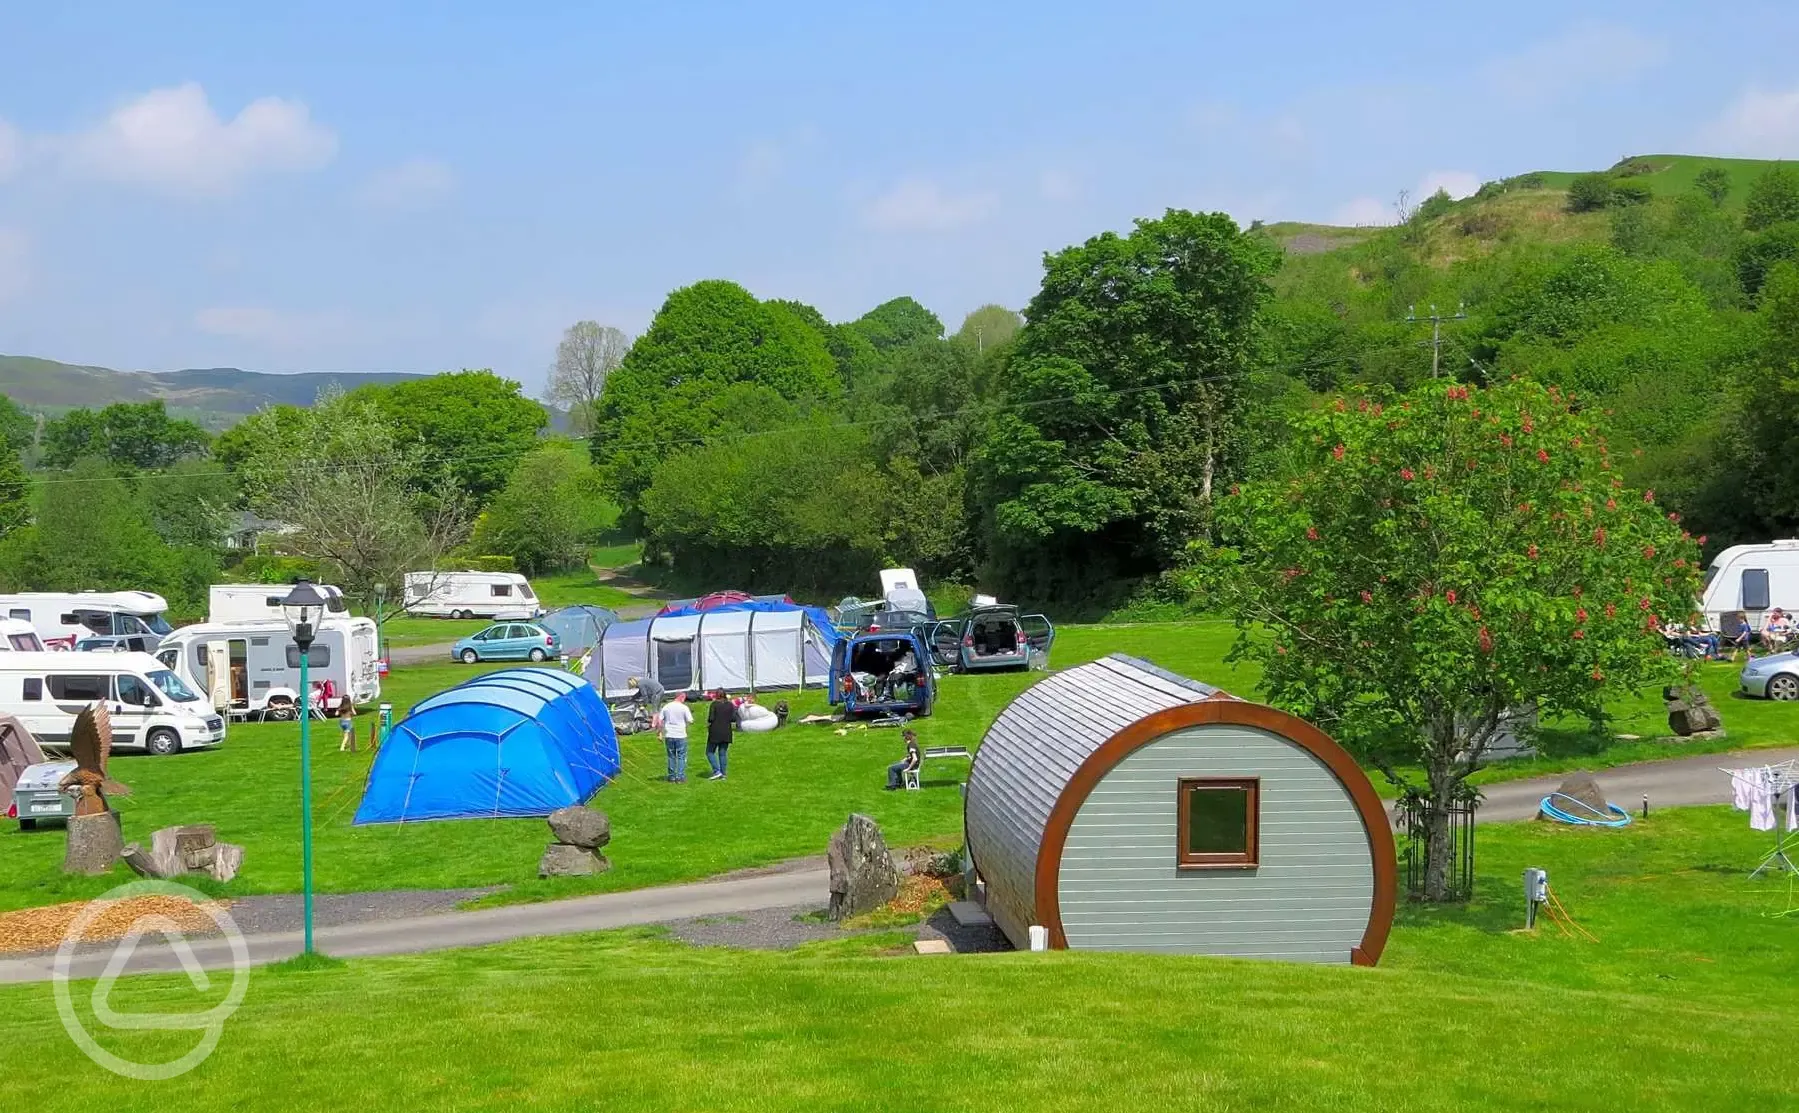 Grass pitches and gypsy pod